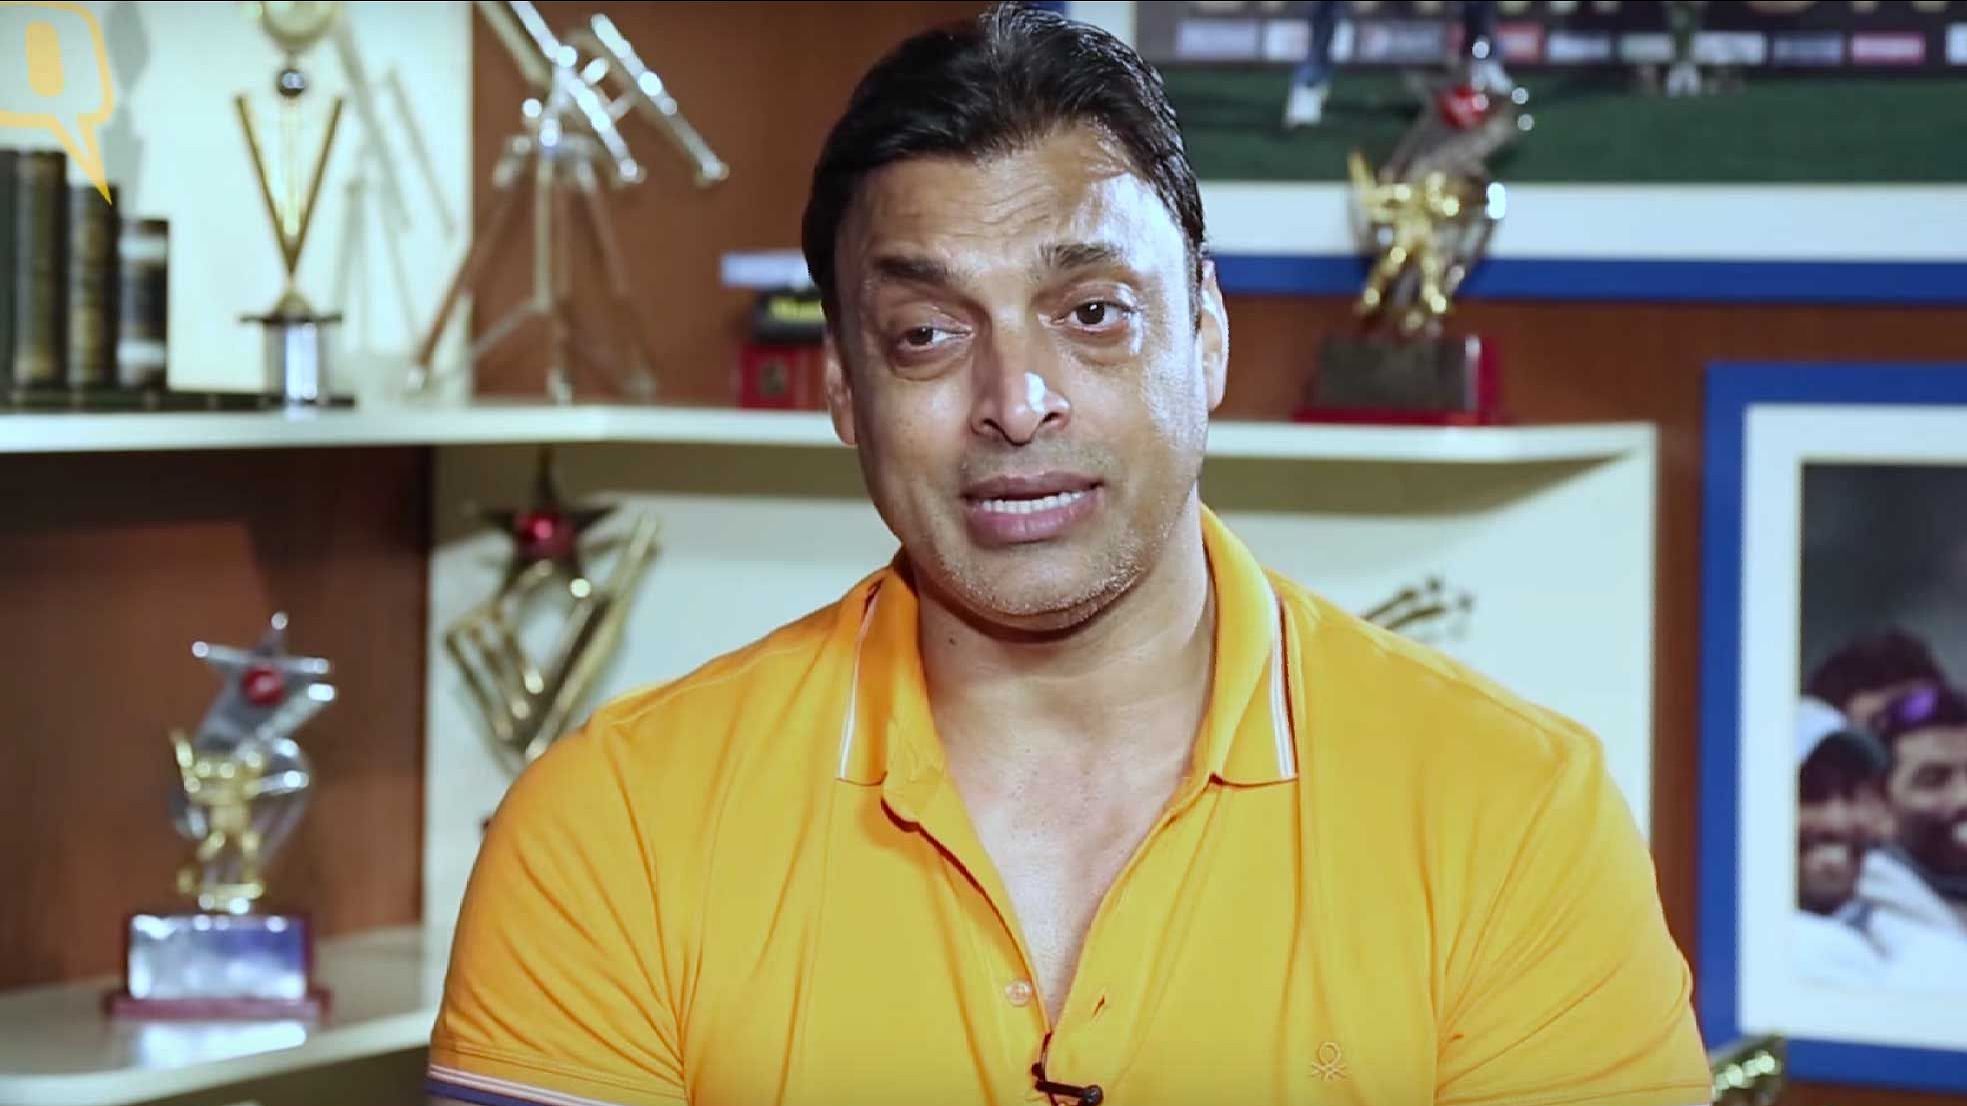 Shoaib Akhtar believes that India and Pakistan should resume bilateral cricketing ties.